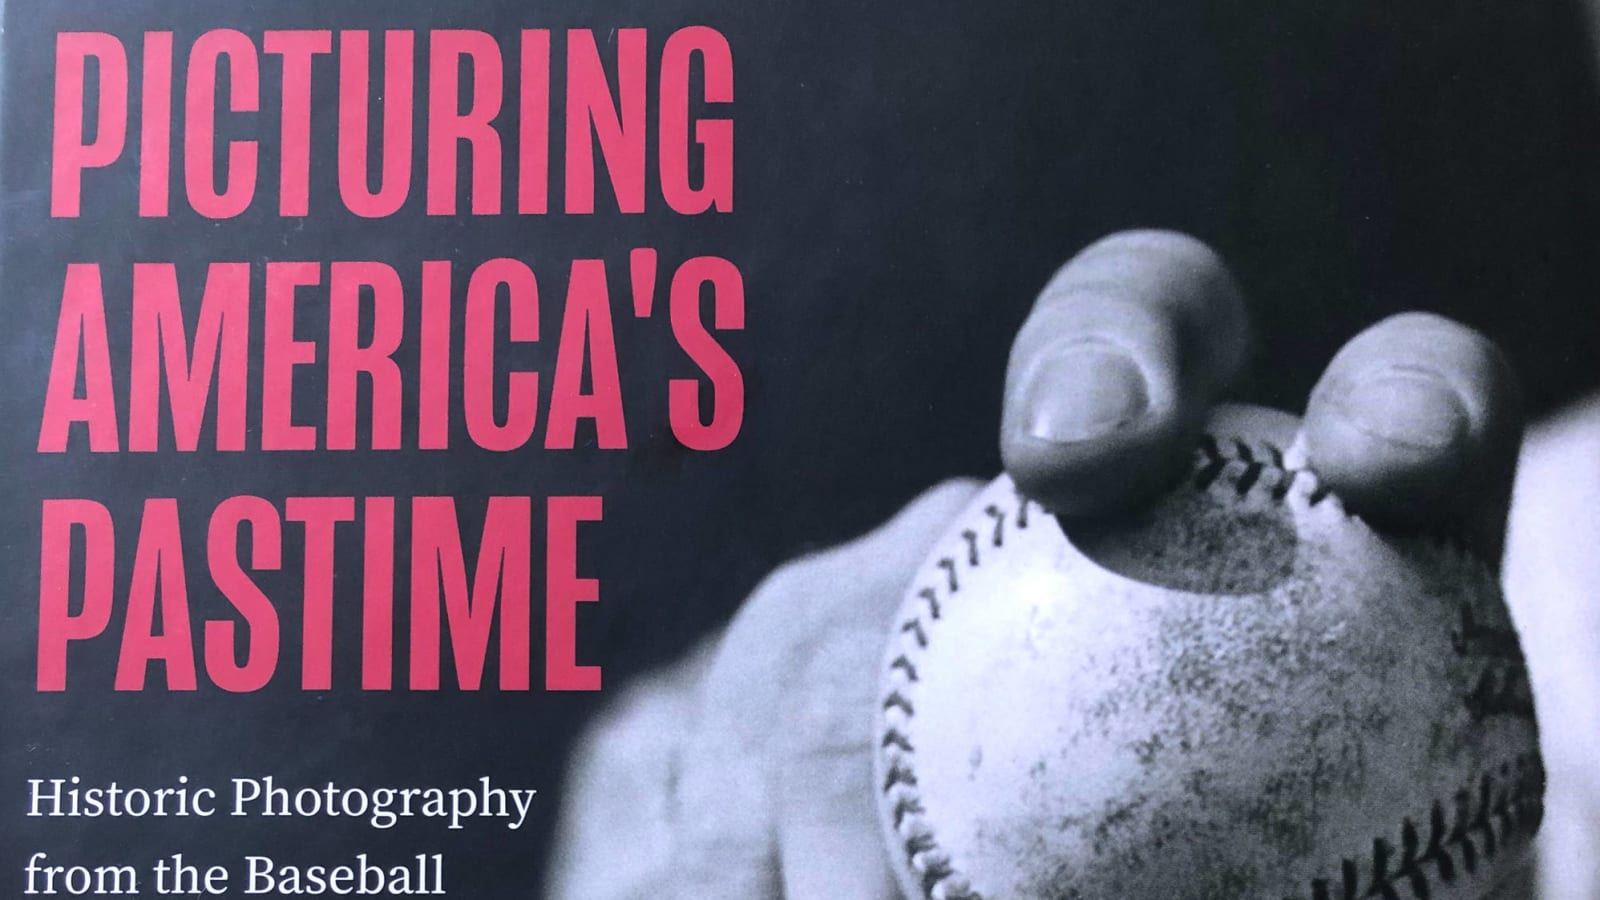 Review: Picturing America's Pastime